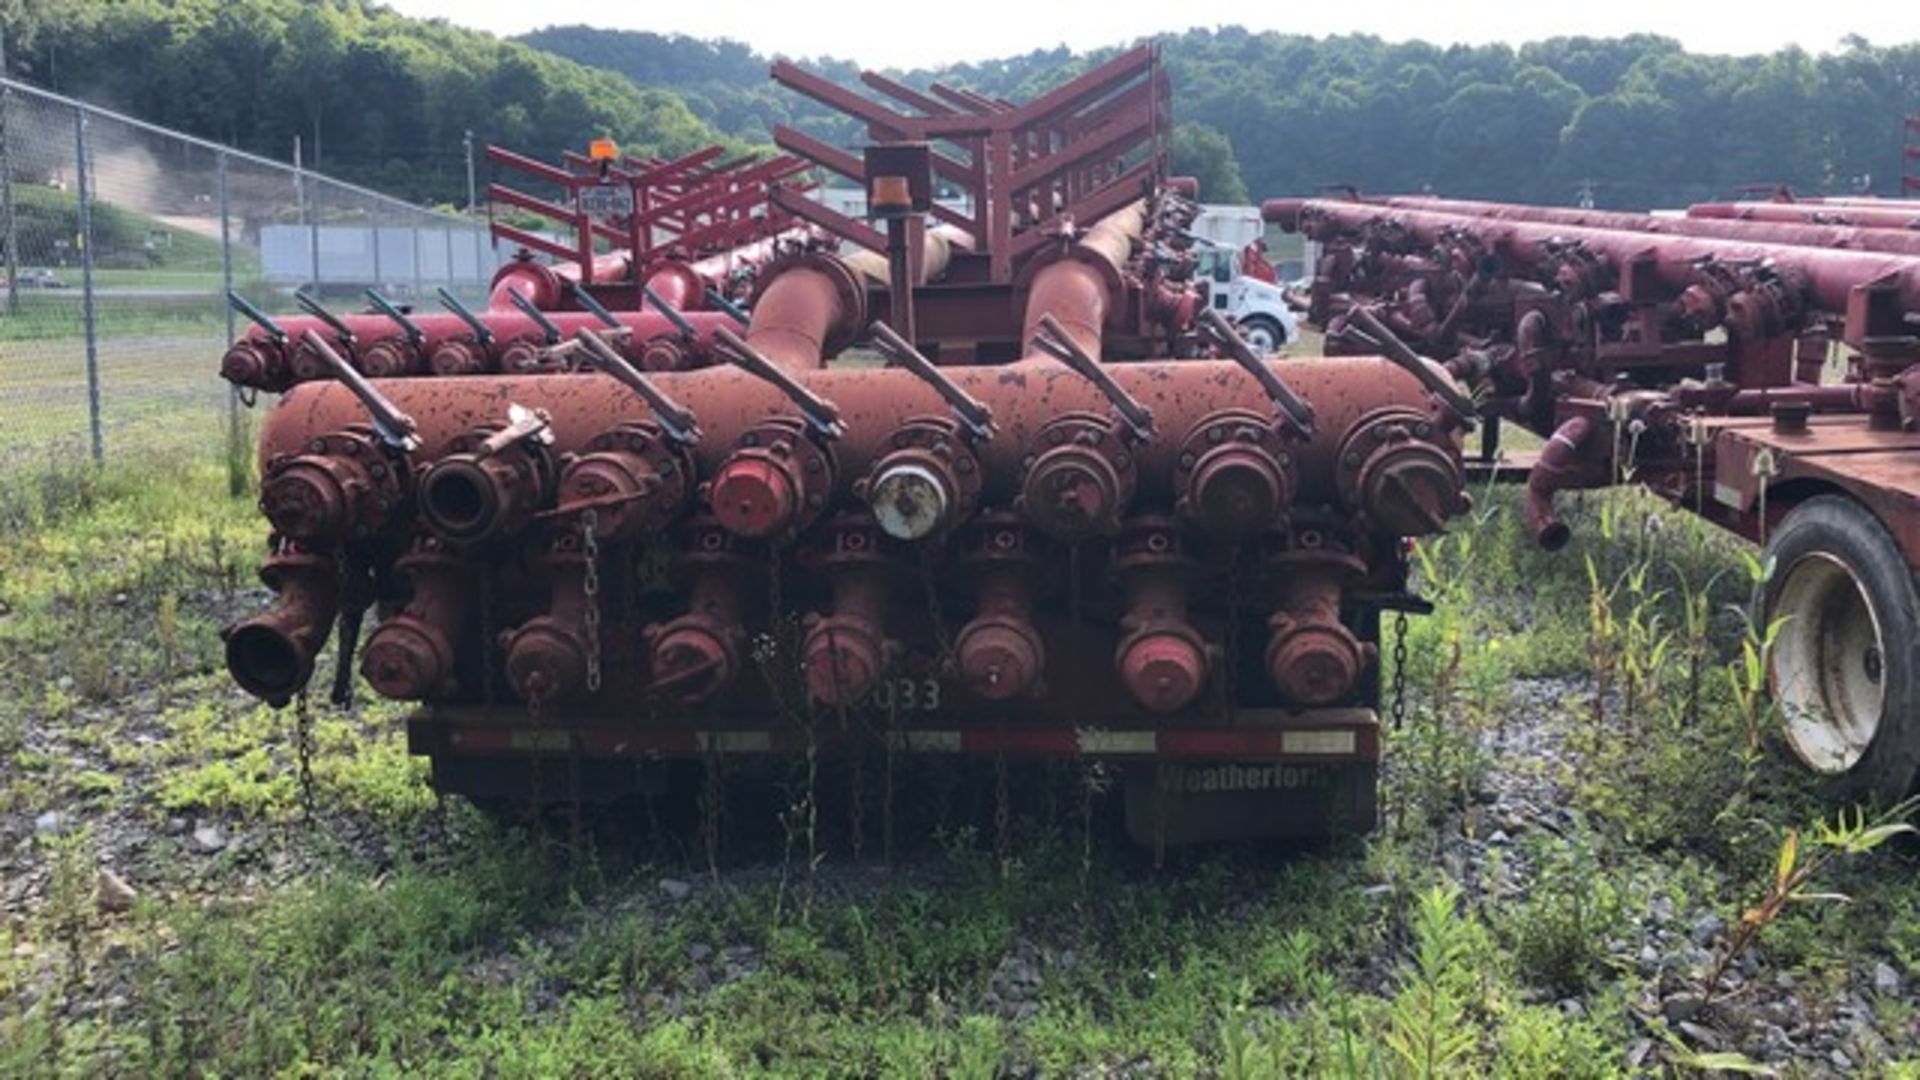 Located in YARD 6 - Buckhannon, WV (802) (X) BO'S BETTER BUILT HIGH PRESSURE S/A MANIFOLD TRAILER, - Image 2 of 4